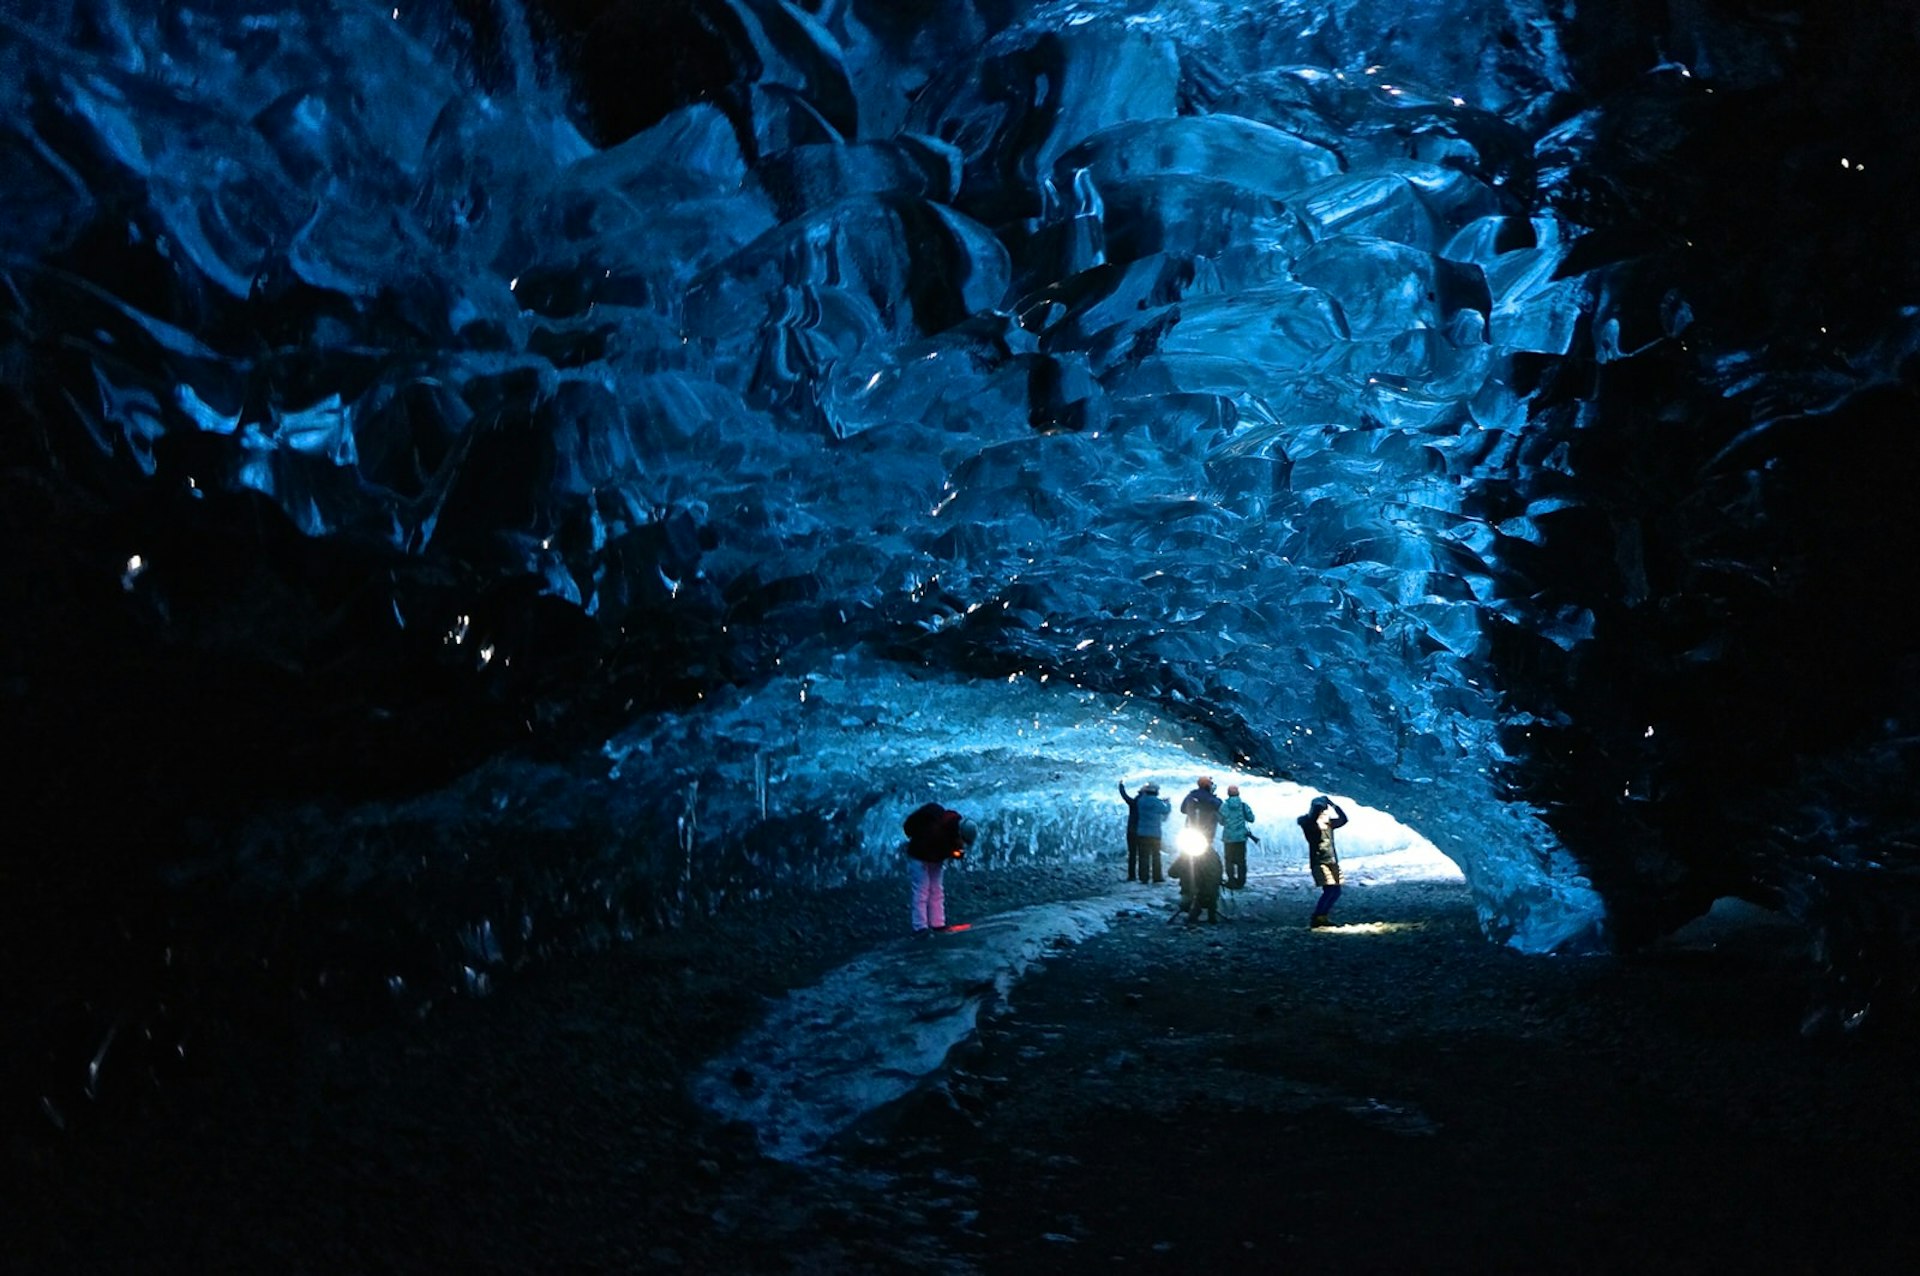 Iceland's shifting glaciers create blue-hued caves each year © Anna Tyler / Lonely Planet